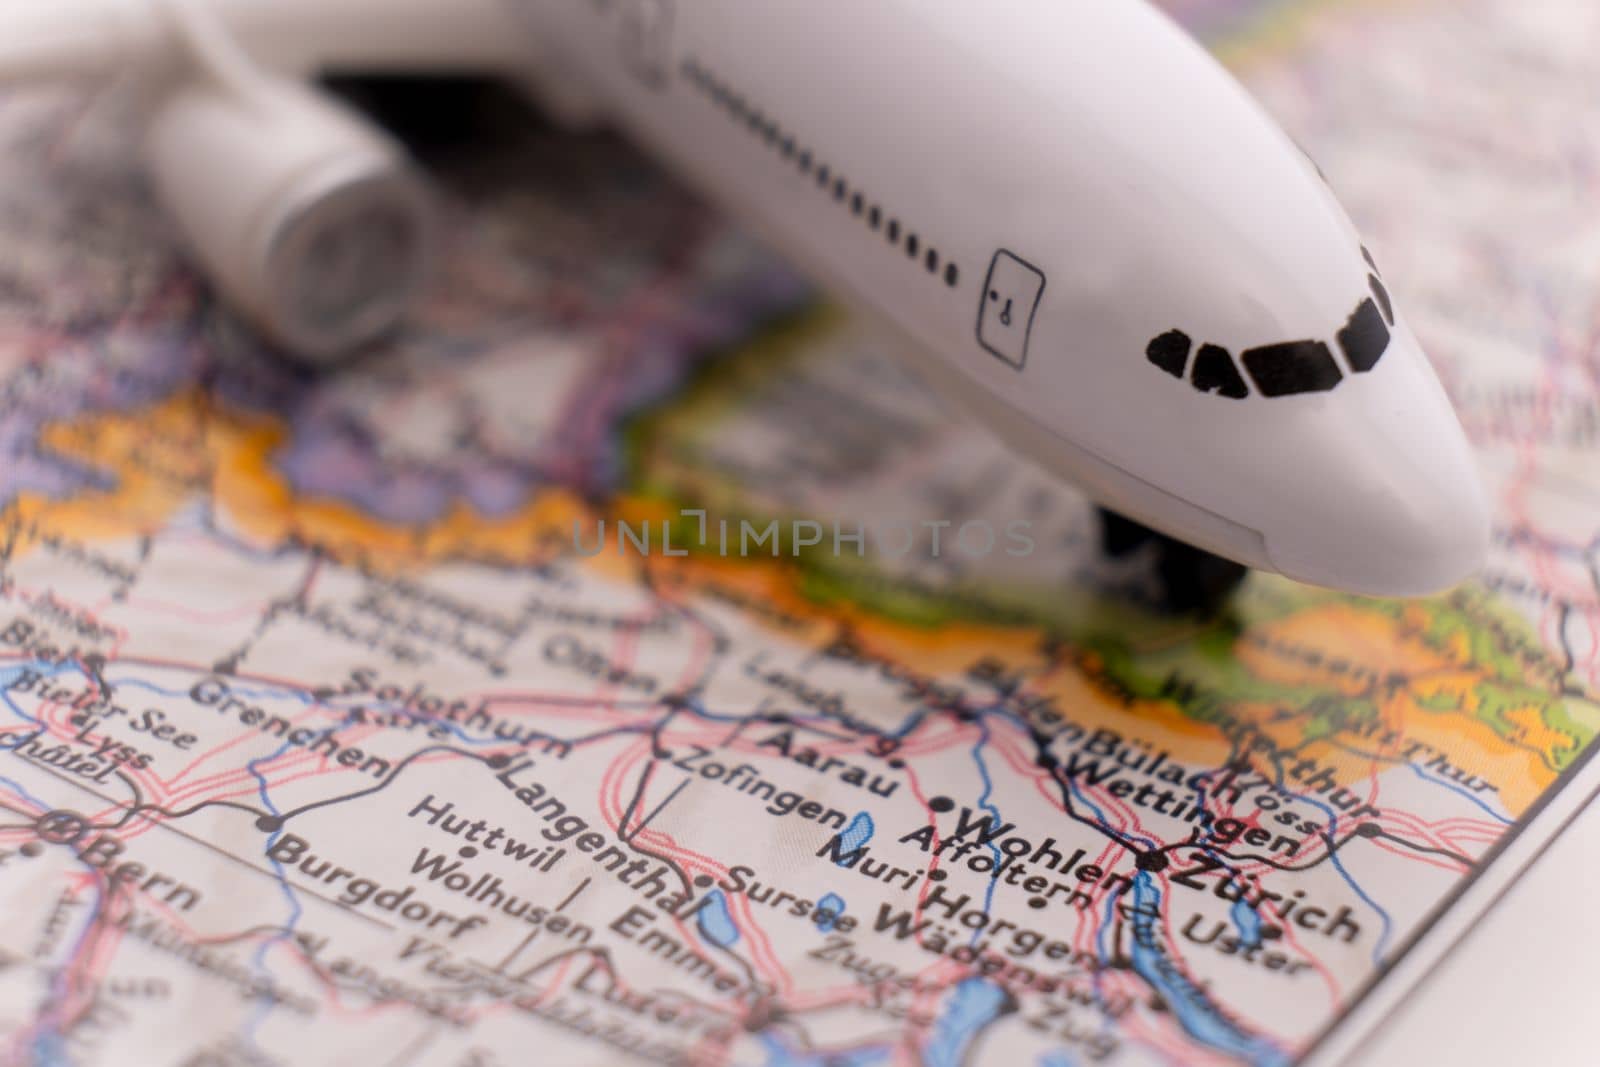 Close up of a miniature passenger plane on a colorful map showing Zurich, Switzerland through selective focus, background blur. High quality photo